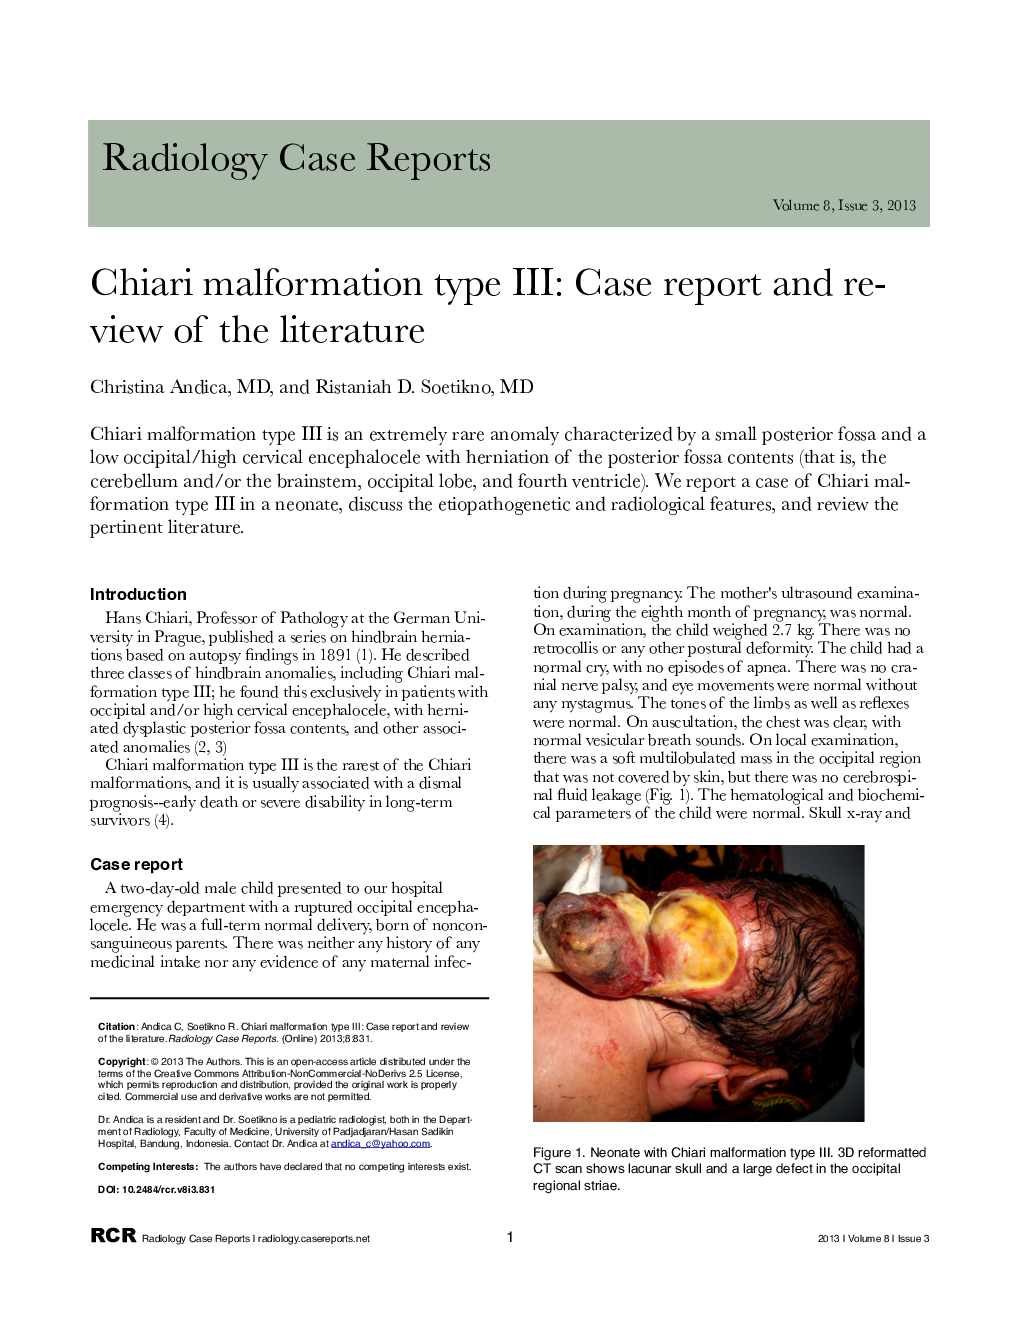 Chiari malformation type III: Case report and review of the literature